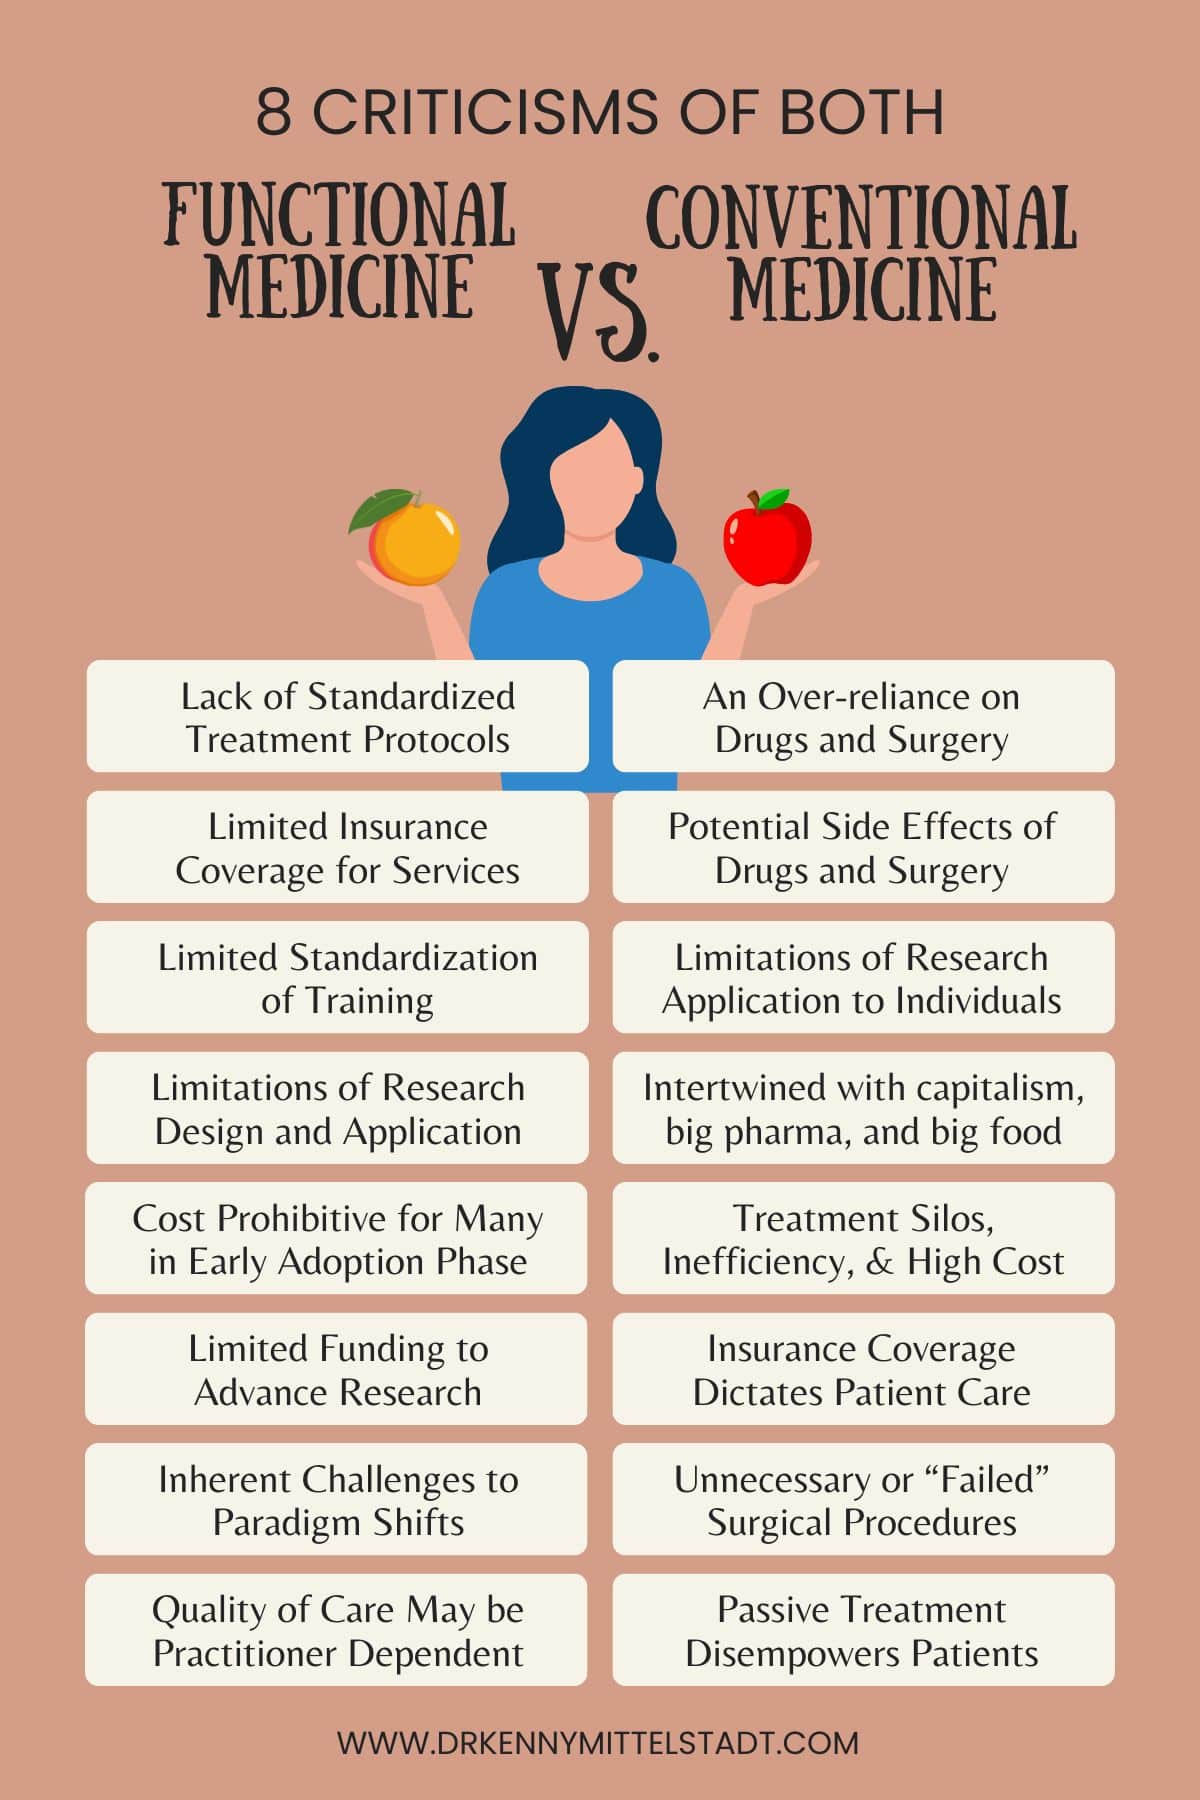 This infographic is a summary of the 8 criticisms of both functional medicine and conventional medicine that are presented in the body of this blog post.